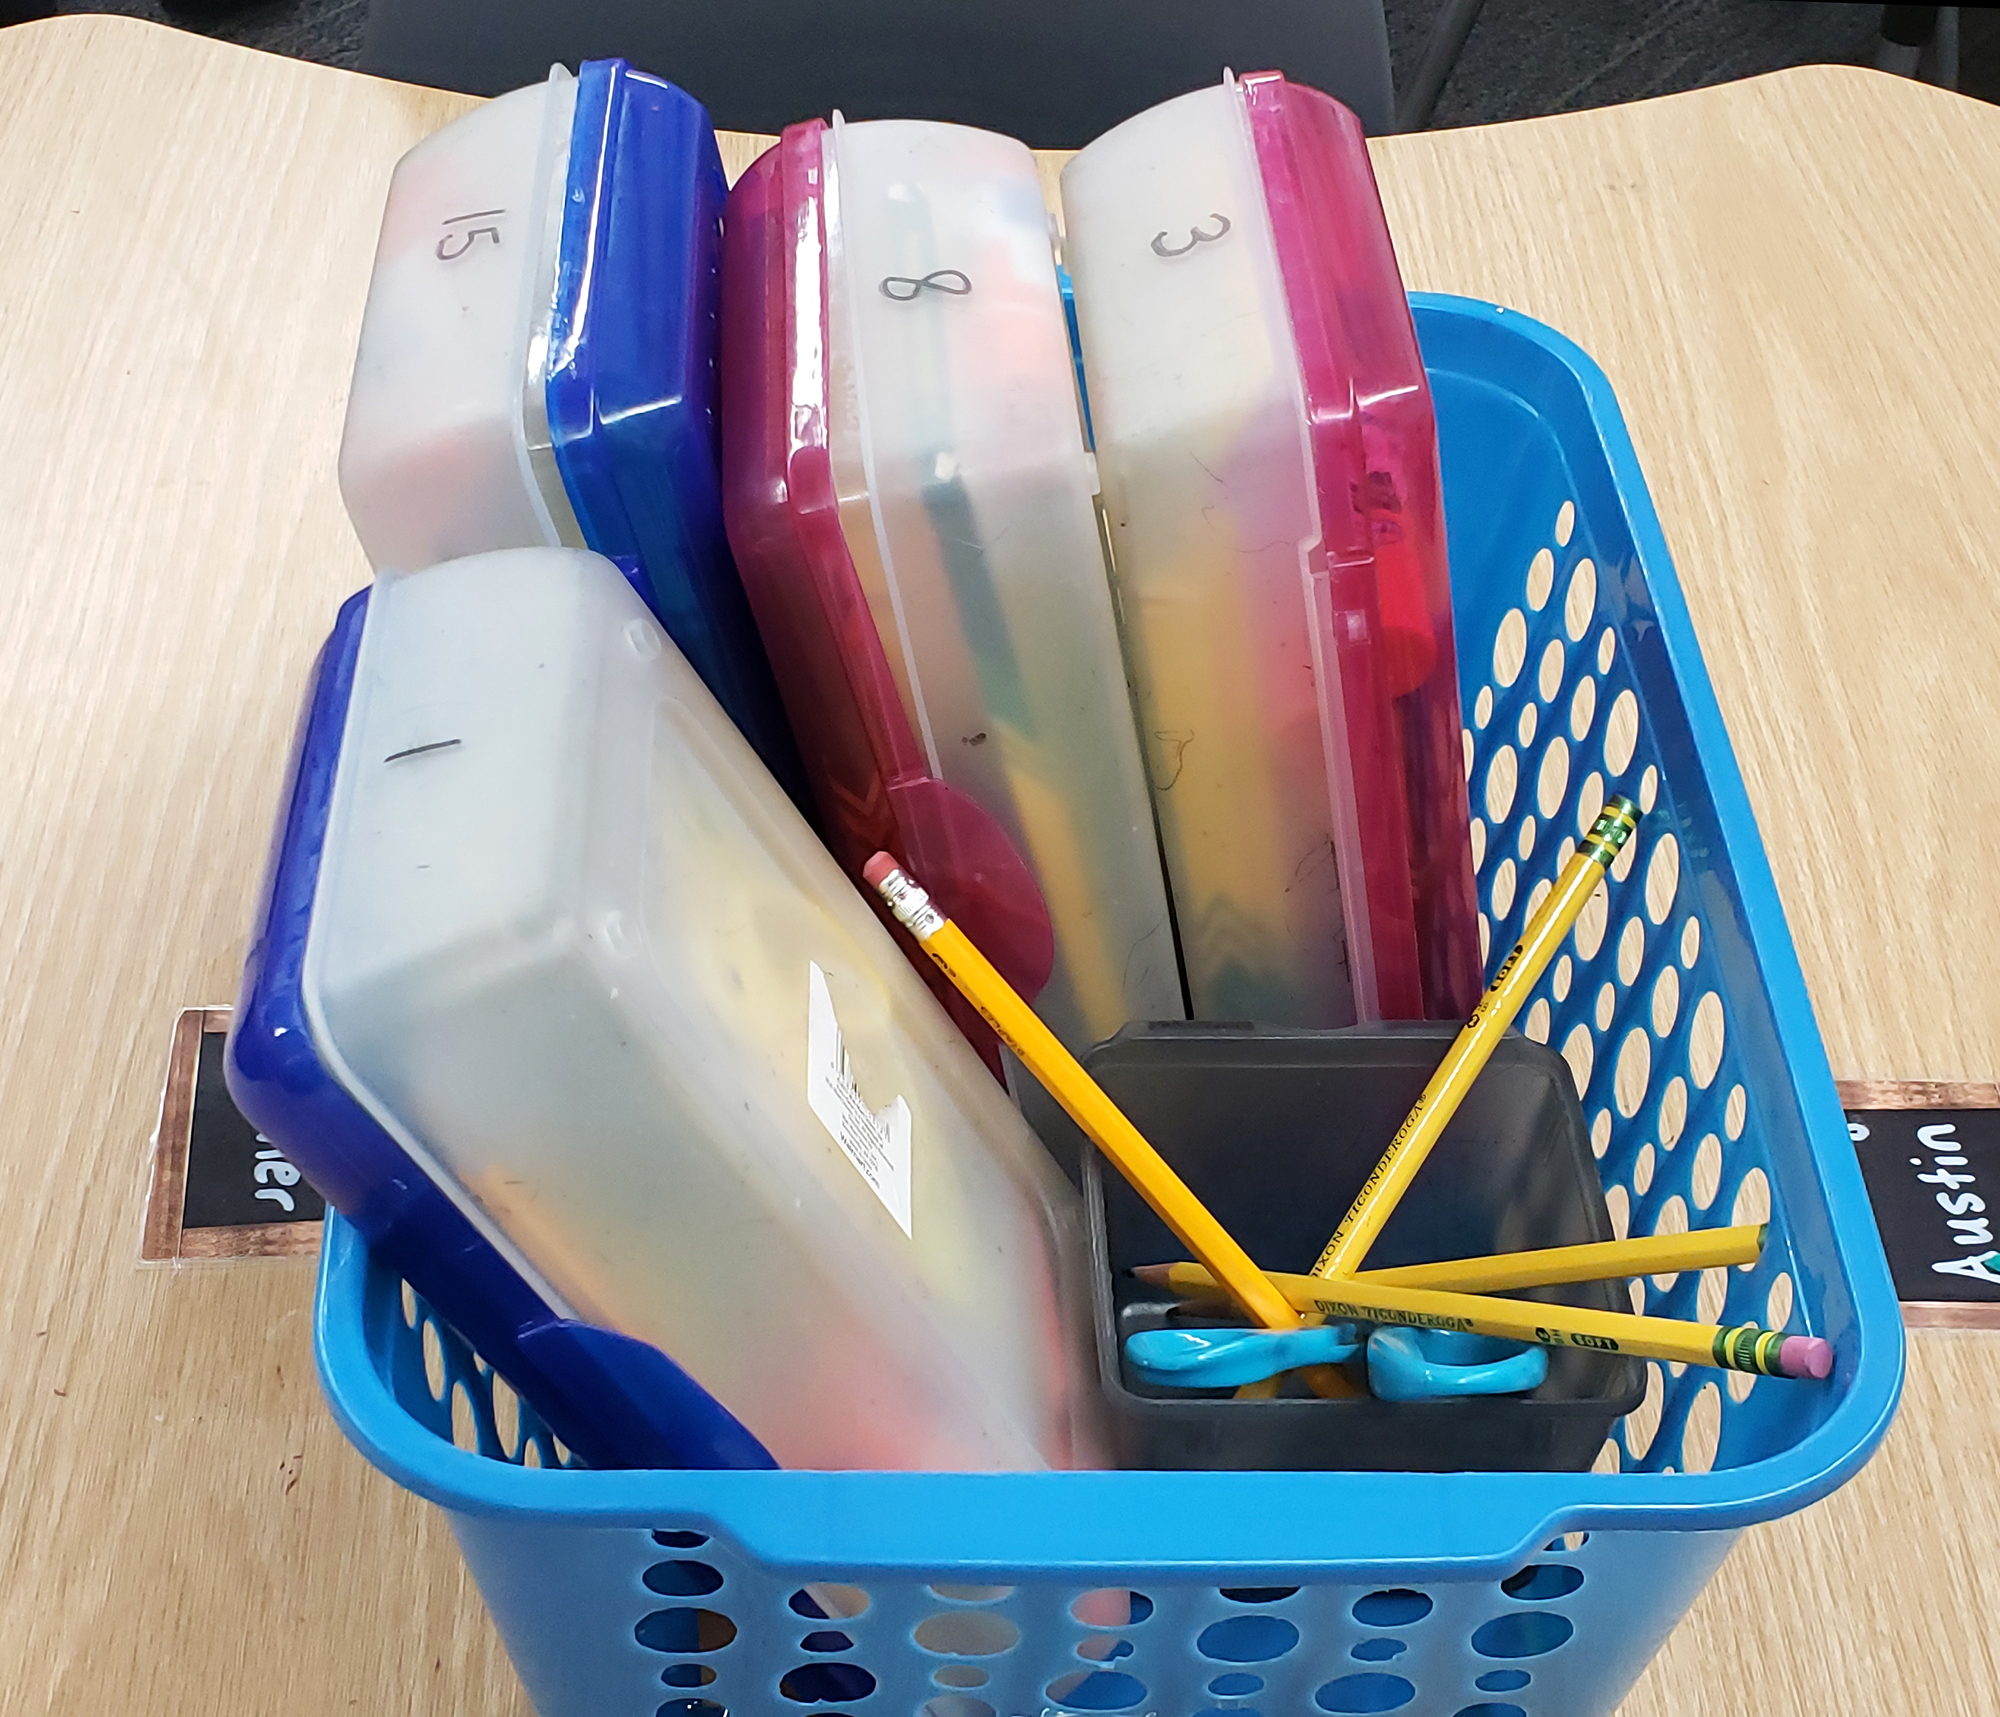 Containers on desks shared by four students each display a number assigned to each student with school supplies such as colored pencils, erasers and glue sticks.